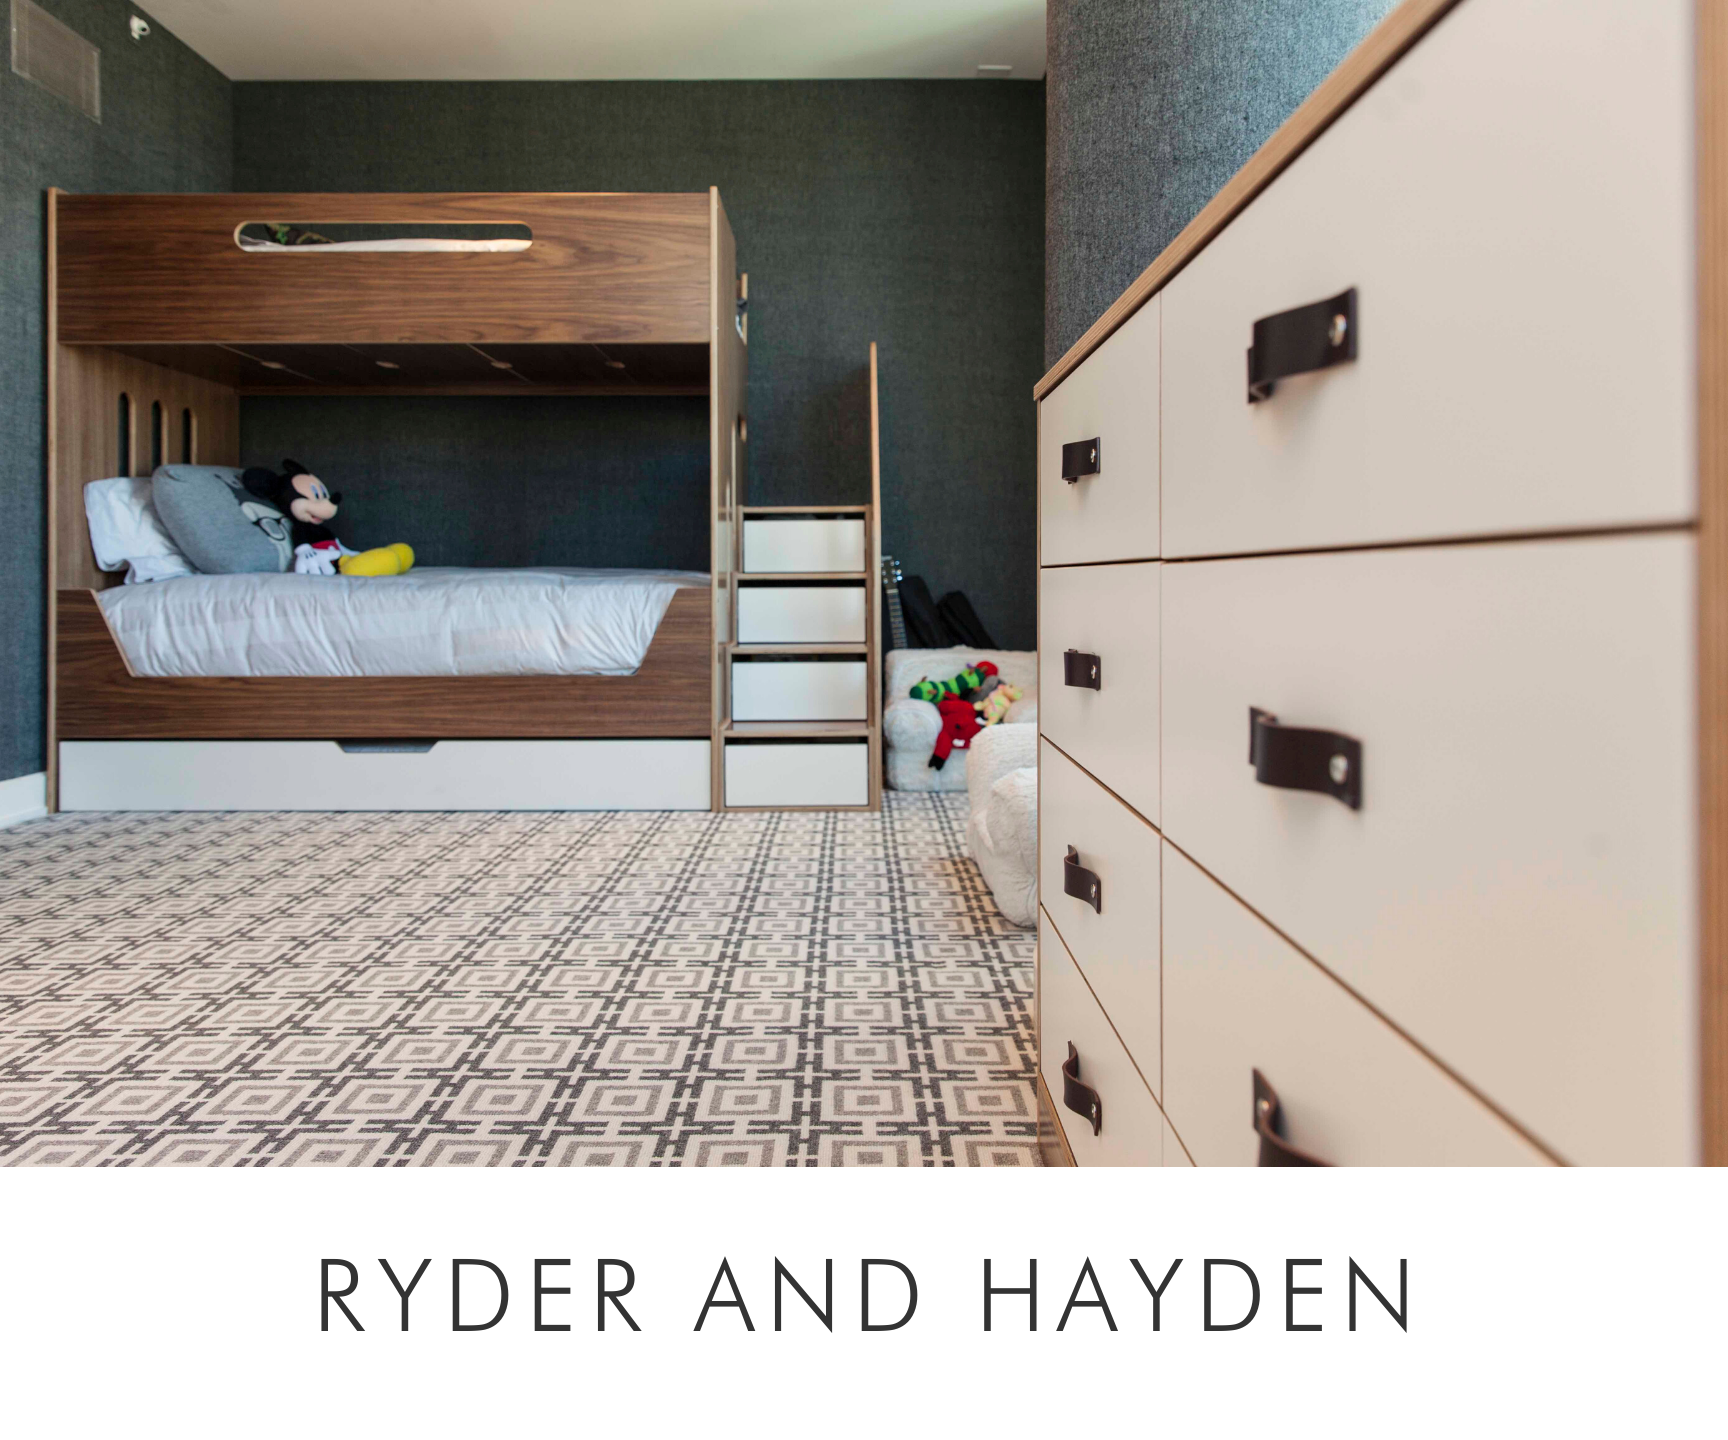 Ryder and hayden modern room with bunk bed, plush toys, patterned carpet, and large white drawers with leather handles.